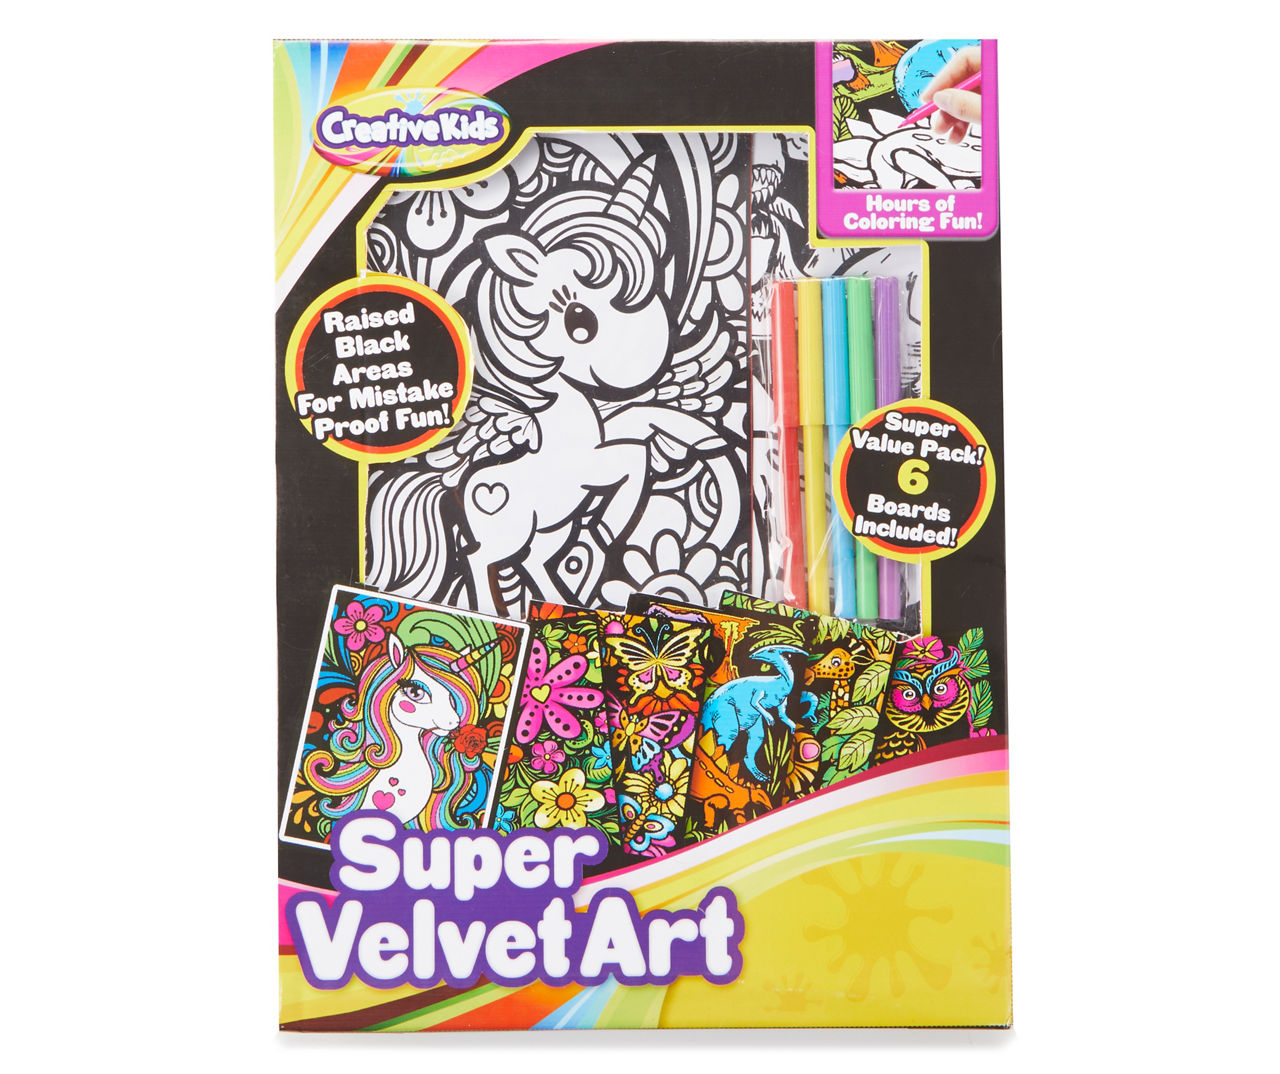 Top 8 Velvet Art Coloring Projects - S&S Blog